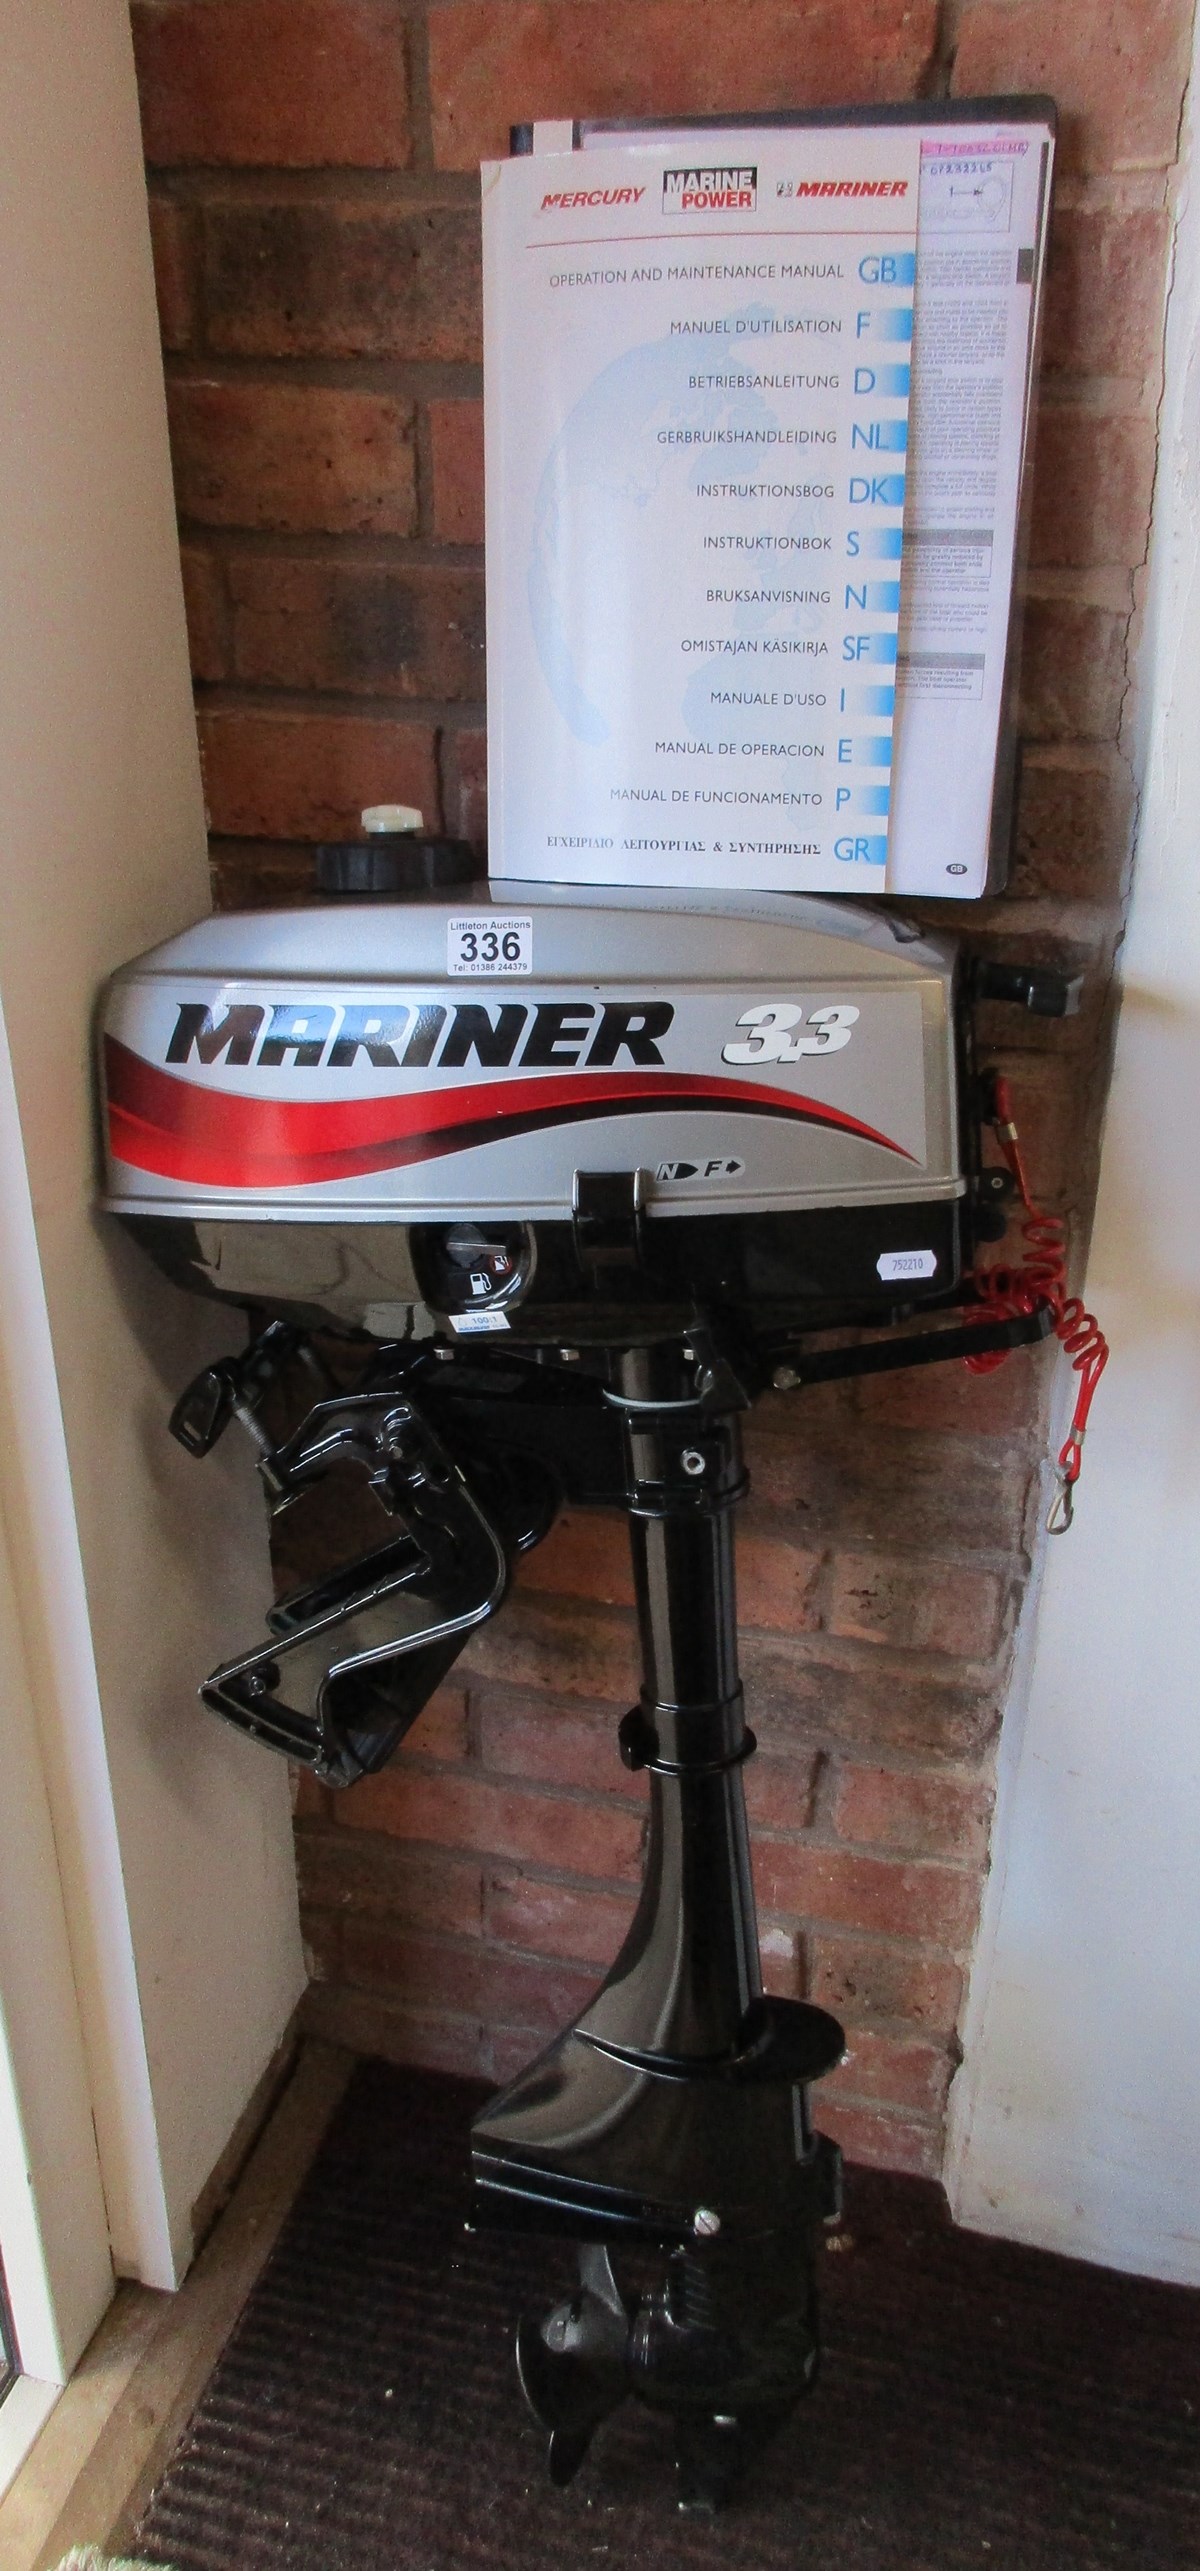 Mercury Mariner outboard motor 3.3 HP (Serial No: OP232265) with paperwork - hardly used